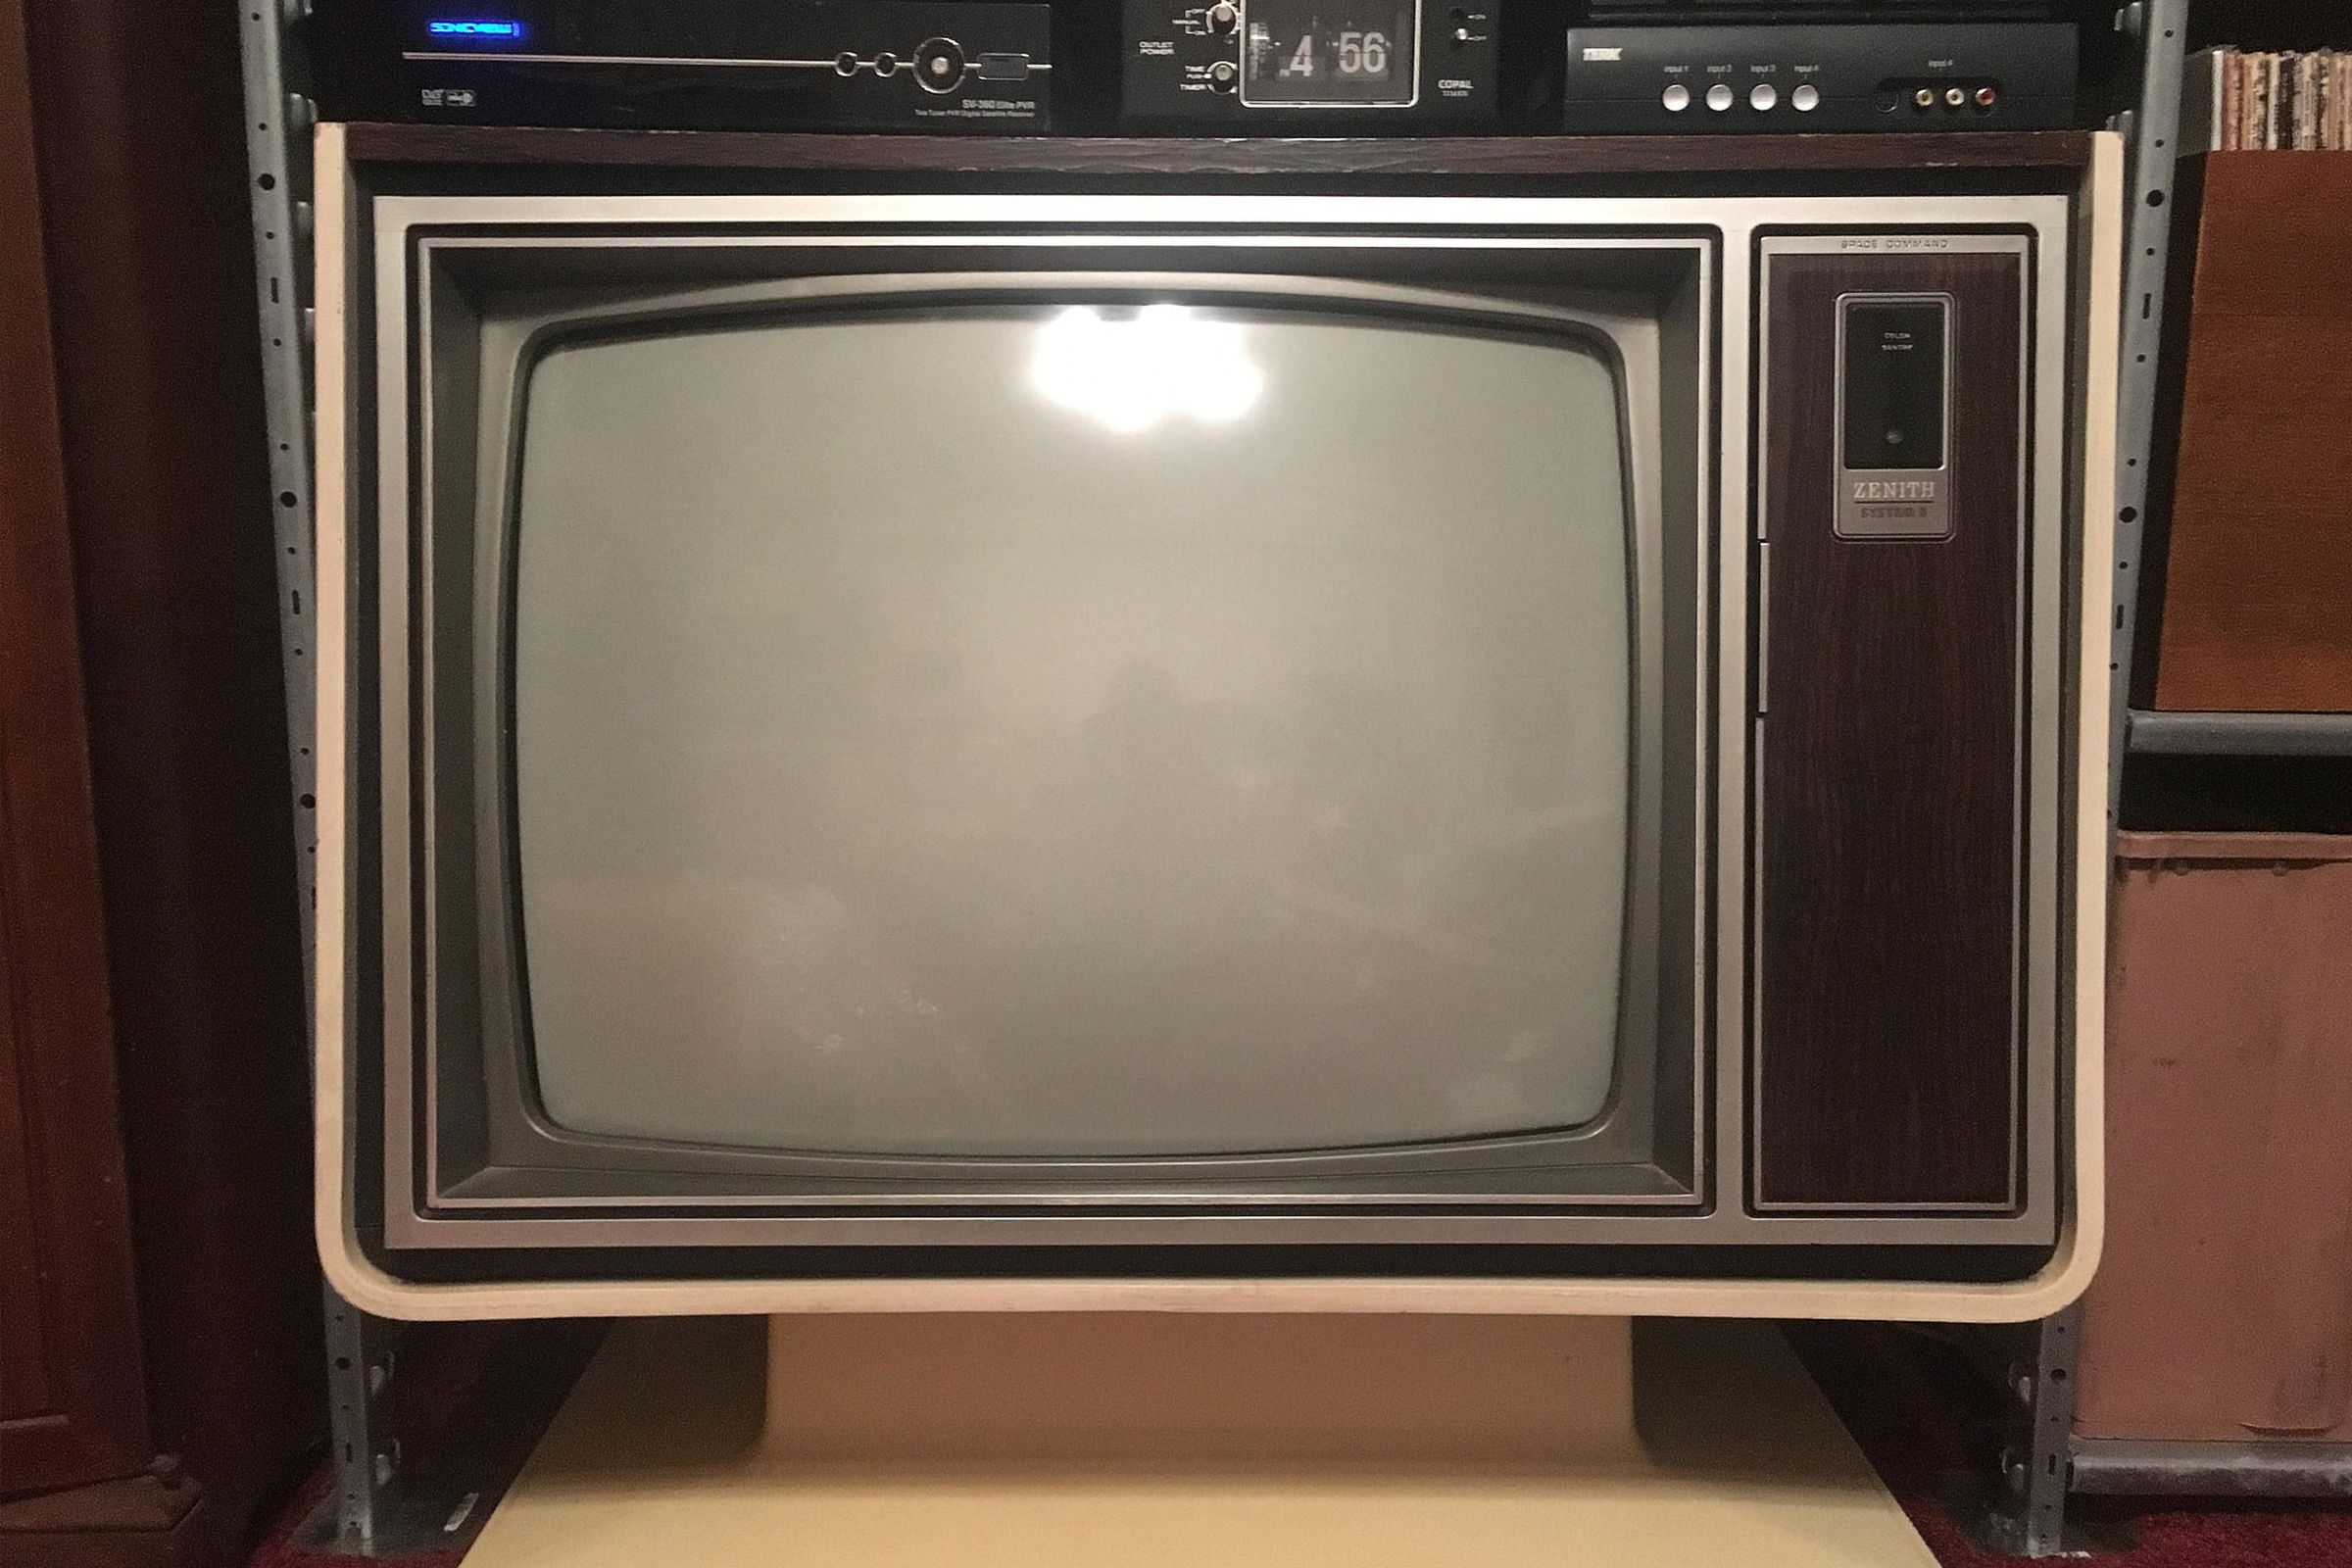 A CRT from Ian Primus’s collection